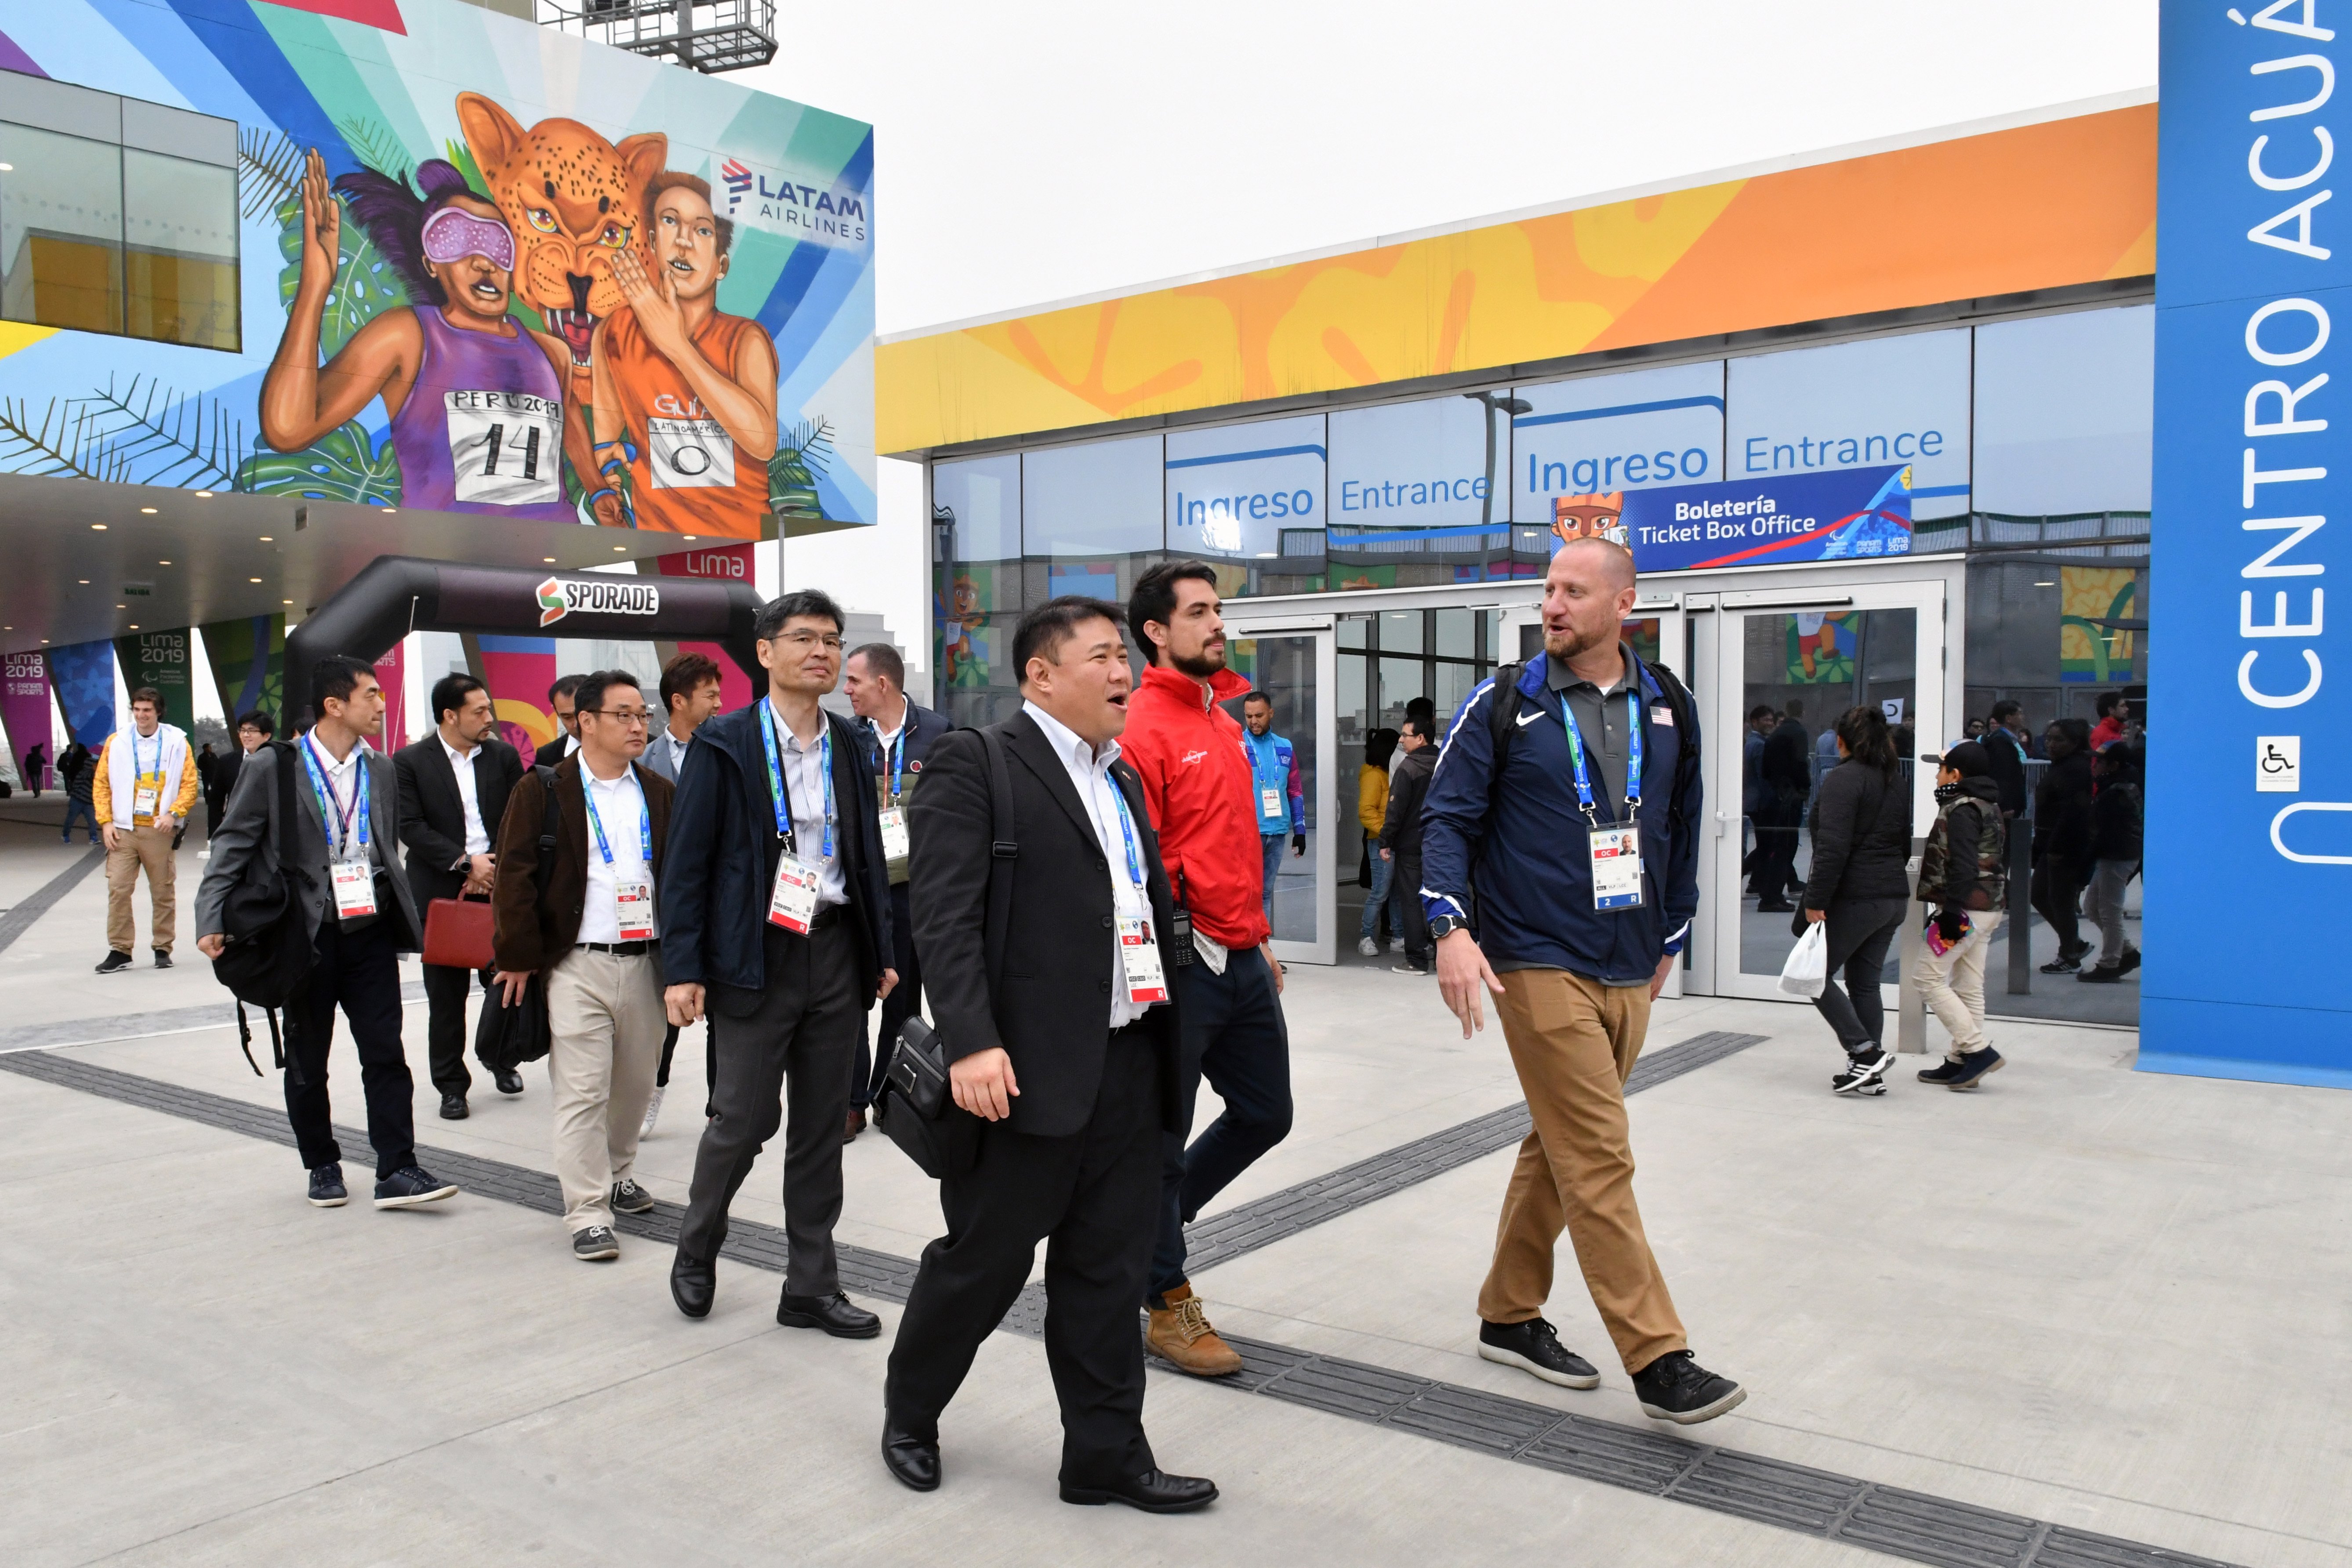  A Diplomatic Security Service special agent leads a Japanese delegation on a tour of the Videna Multi-Sport complex, Lima, Peru, August 2019. | Source: Wikimedia Commons